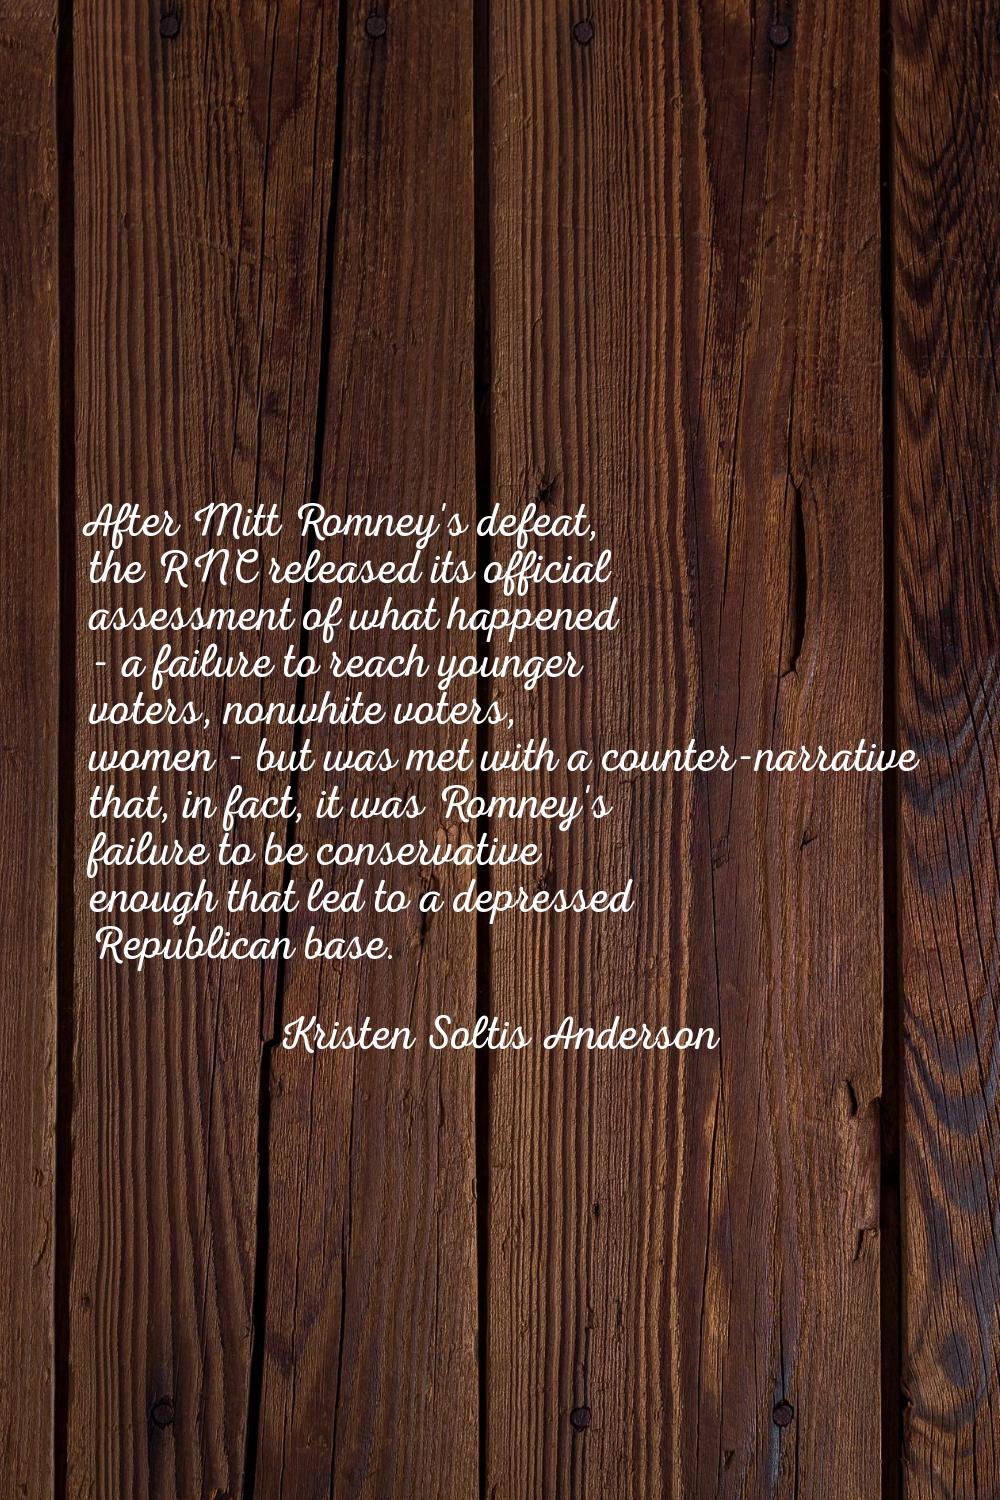 After Mitt Romney's defeat, the RNC released its official assessment of what happened - a failure t